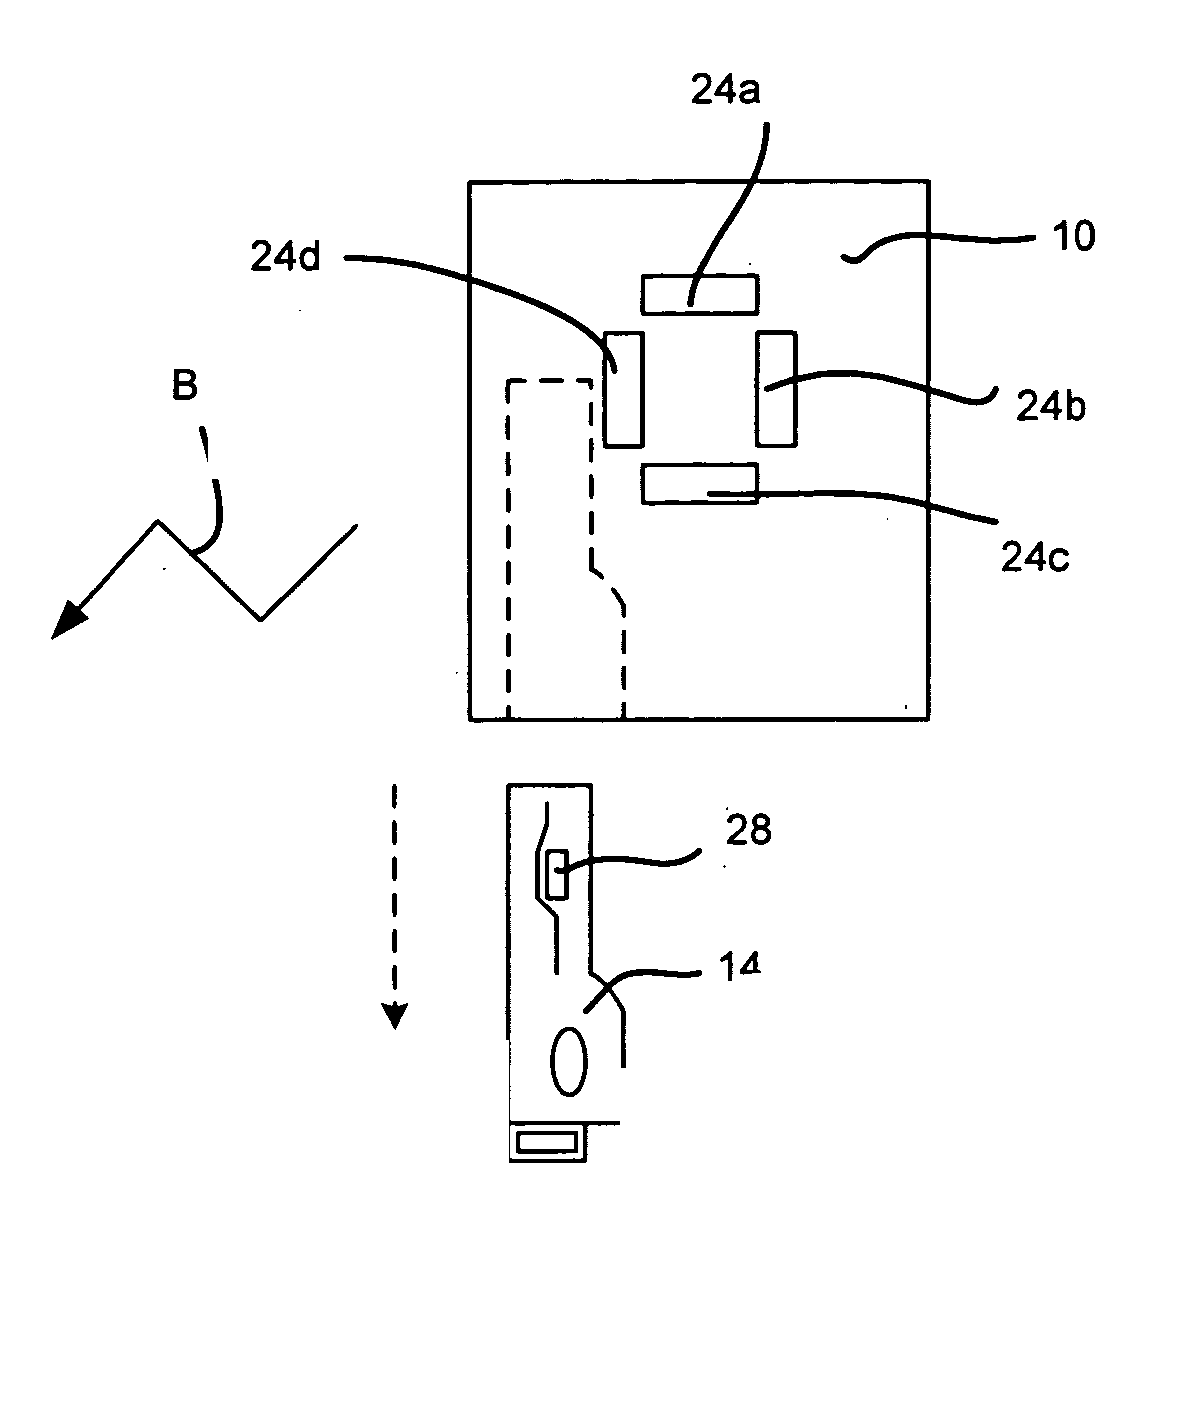 System for controlling a valet mode of a vehicle